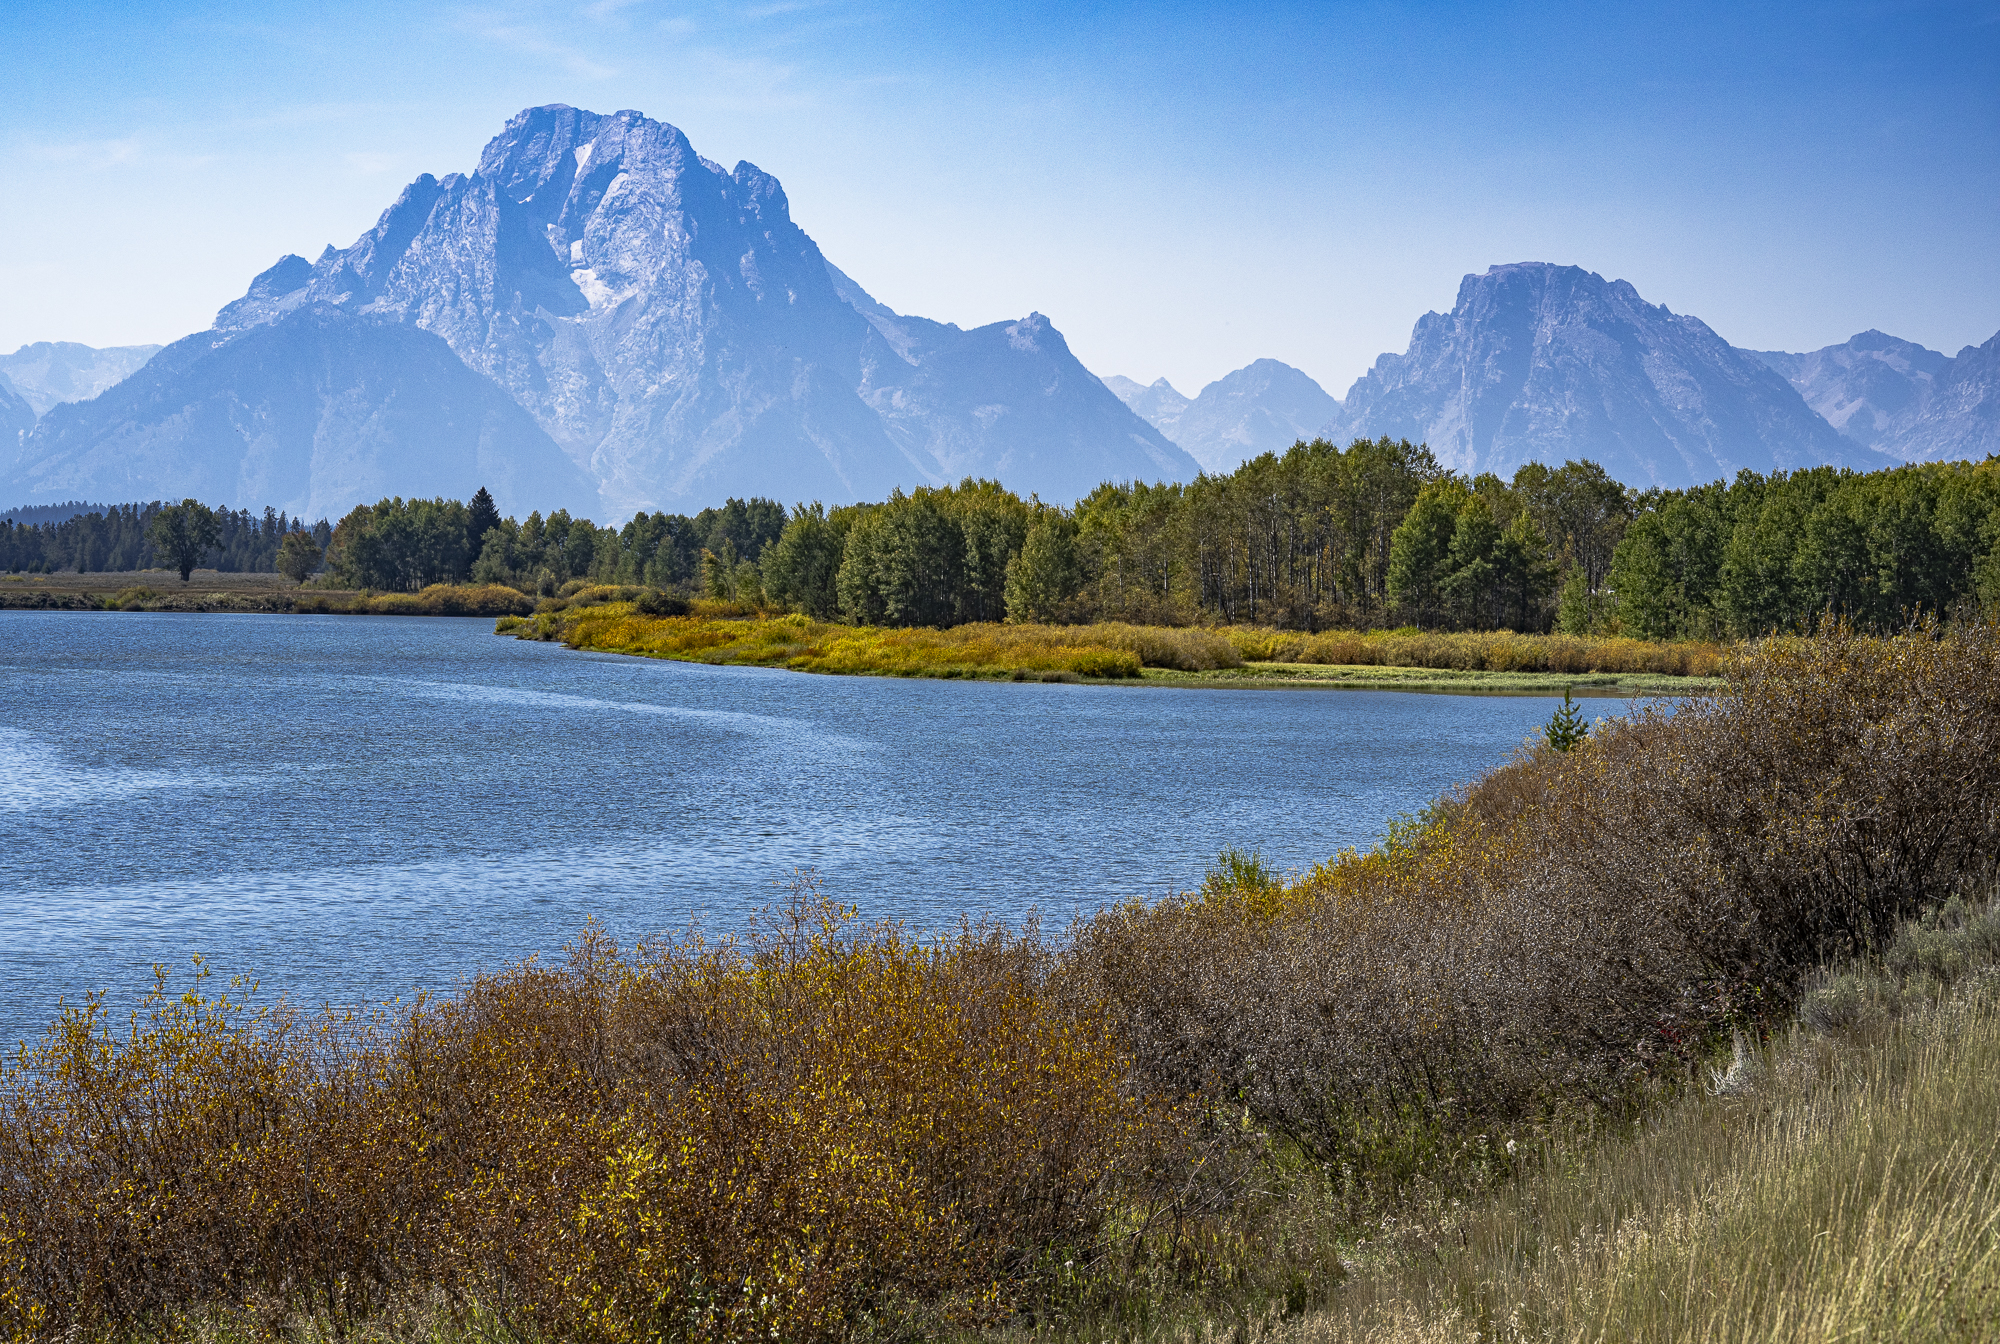 Mount Moran from the Oxbow